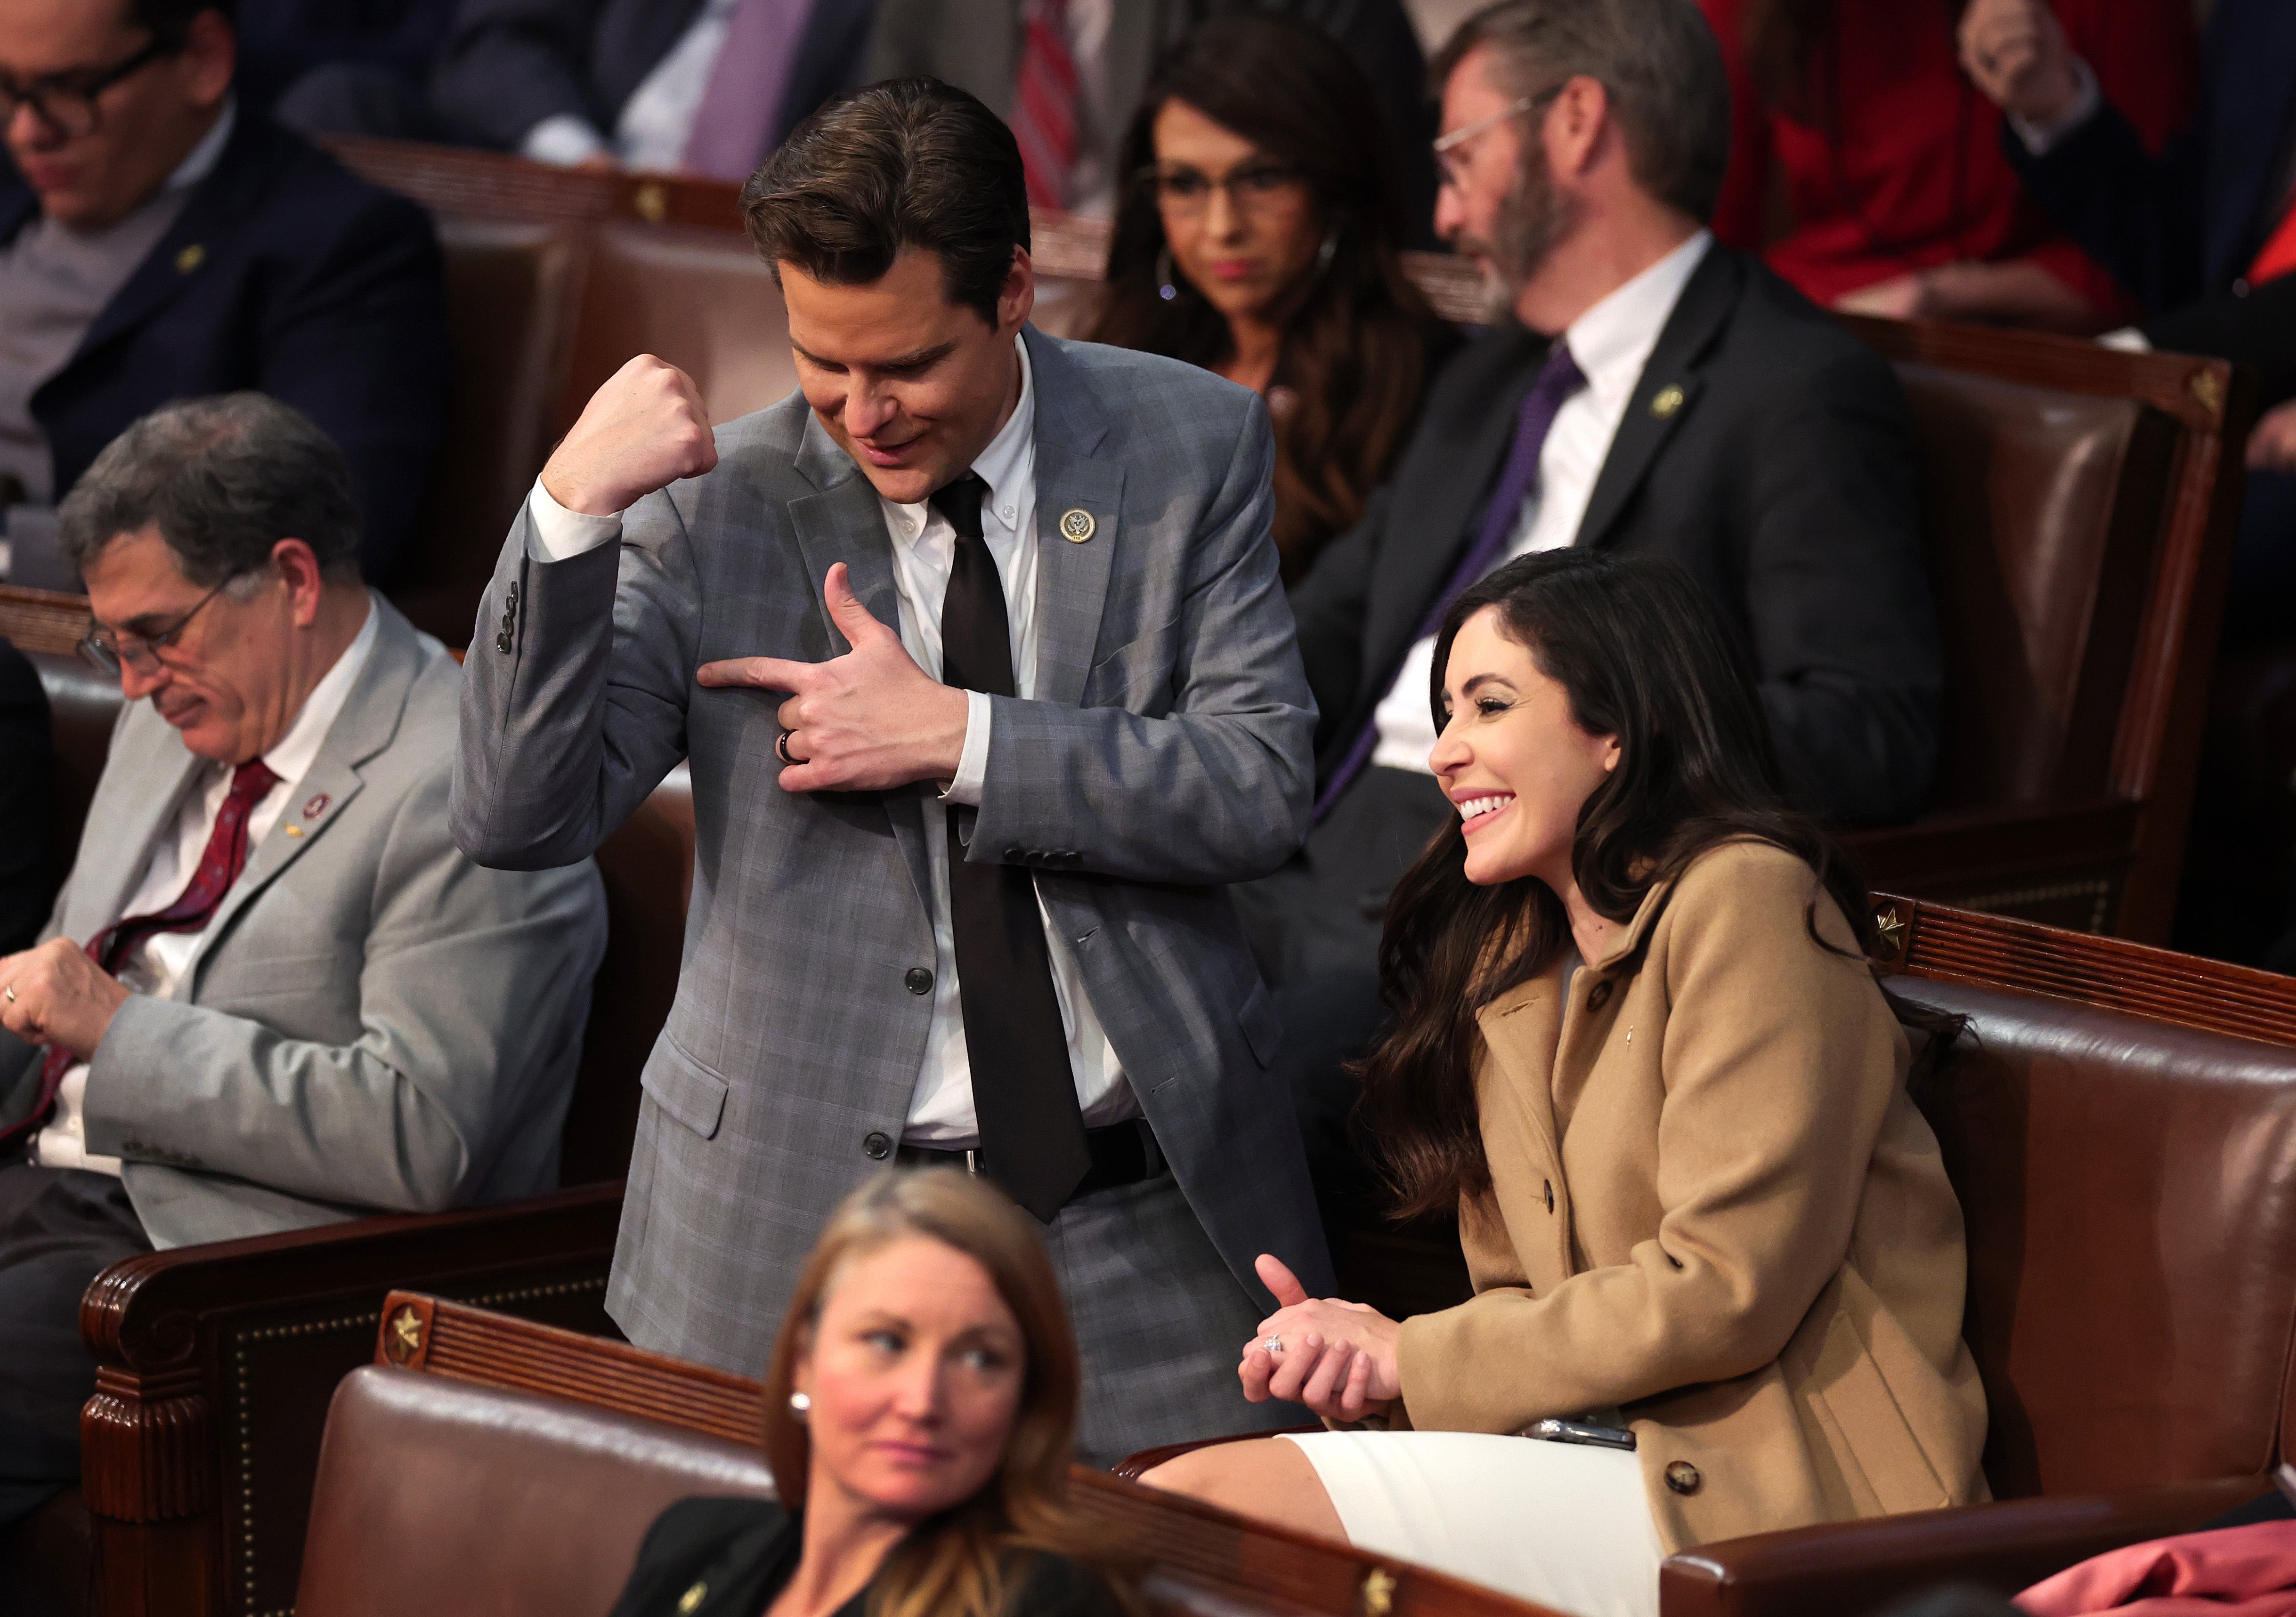 Matt Gaetz flexes his arm alongside Anna Paulina Luna after getting into an argument with Mike Rogers